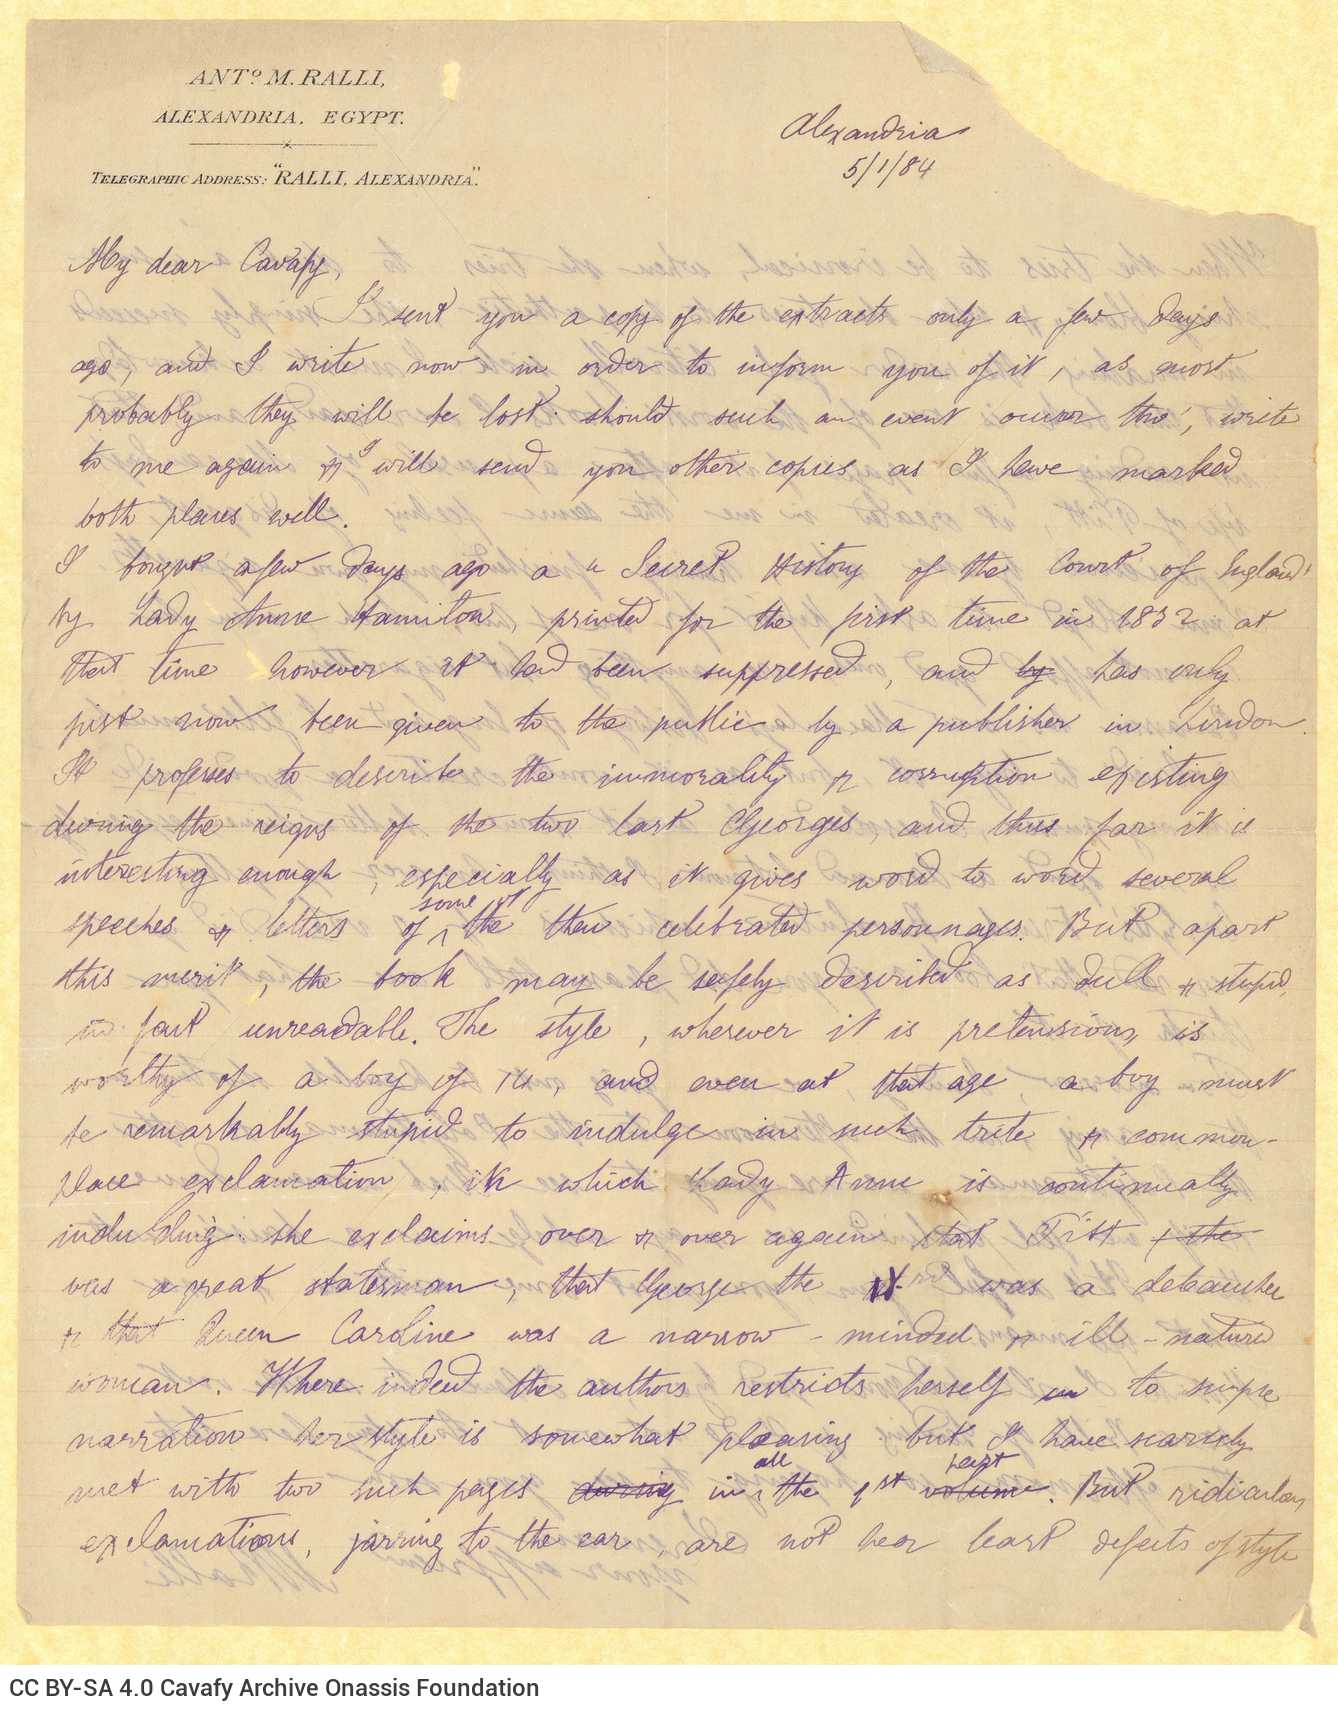 Handwritten letter by Mike Ralli to Cavafy on both sides of a sheet. He informs him about the previous letter he has sent and